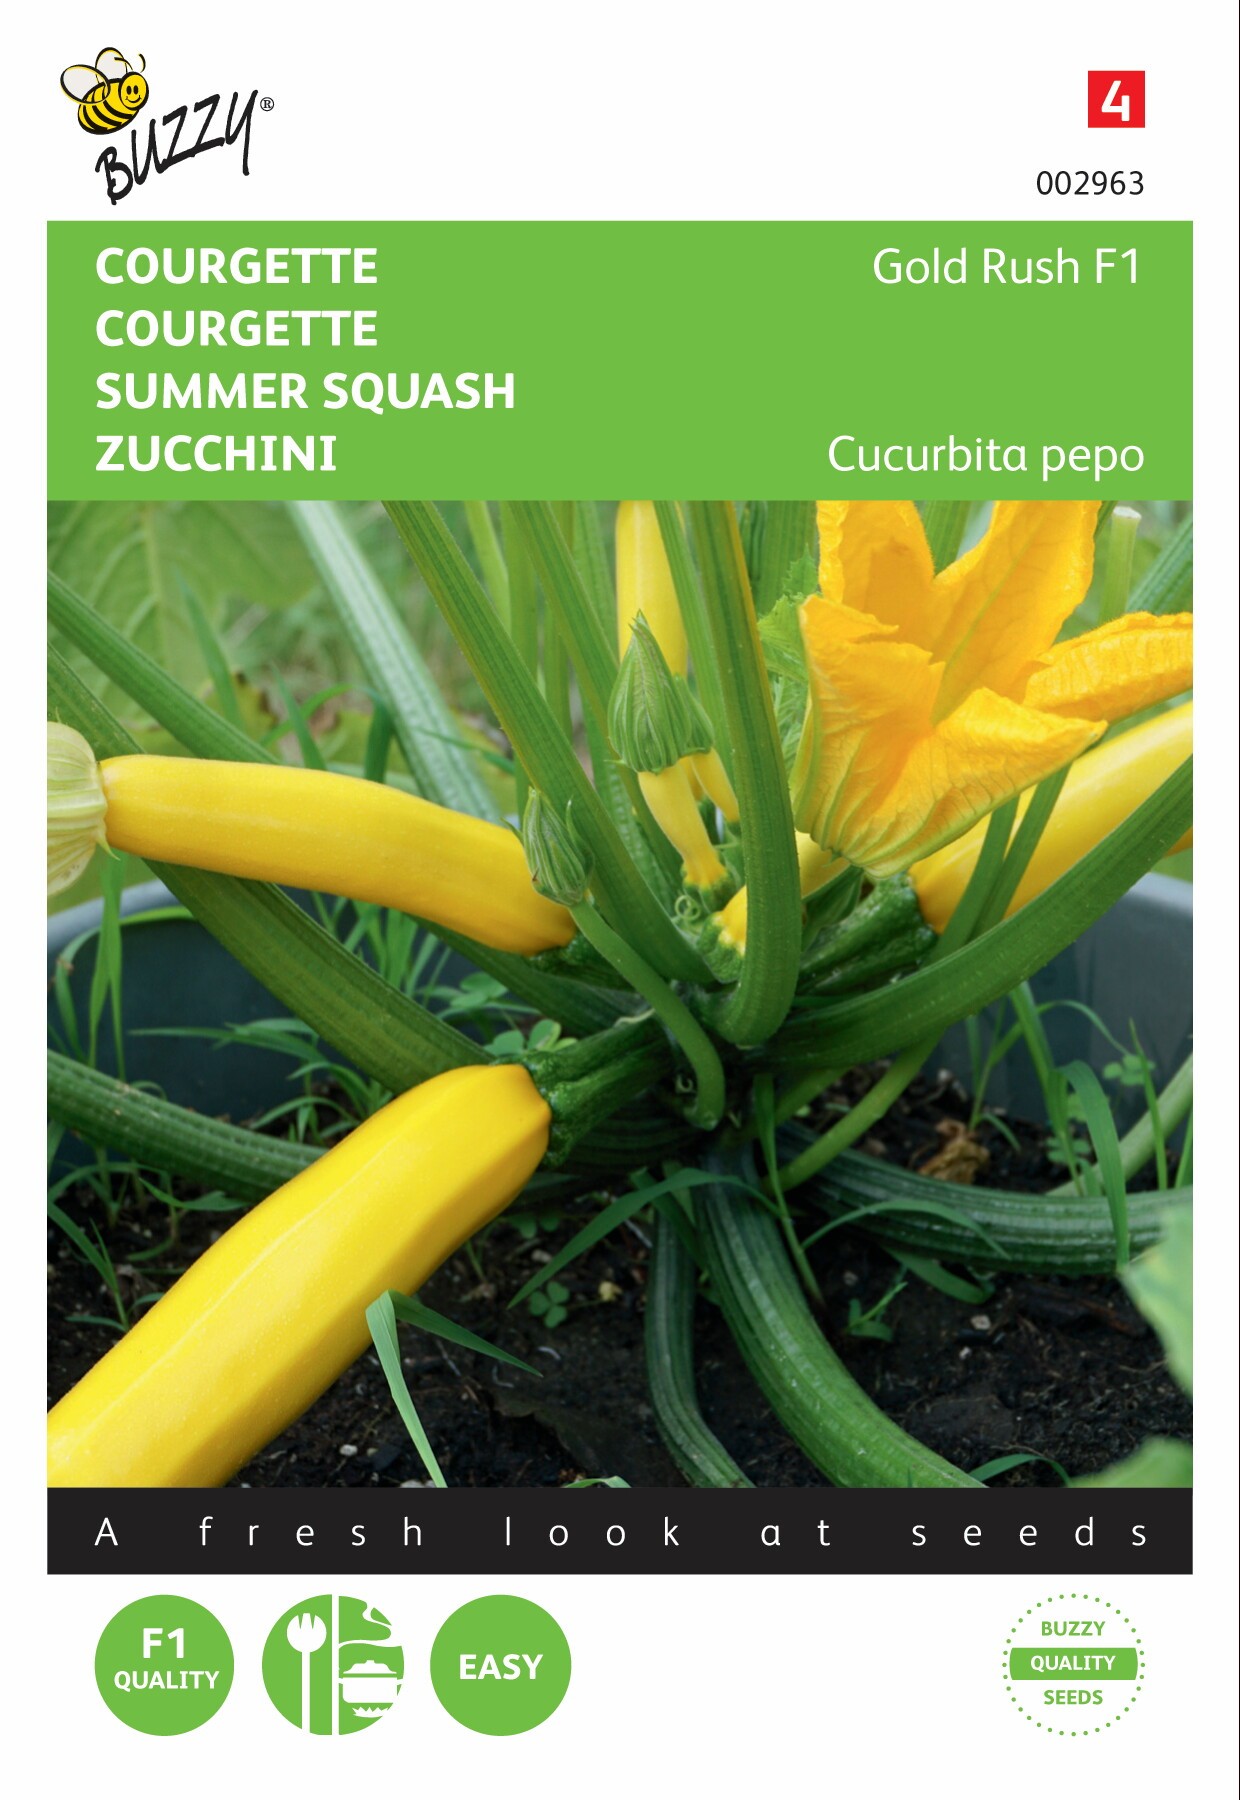 https://www.warentuin.nl/media/catalog/product/1/7/1778711117029632_buzzy_seeds_tuinzaden_buzzy_courgette_gold_rush_f1_6805.jpeg